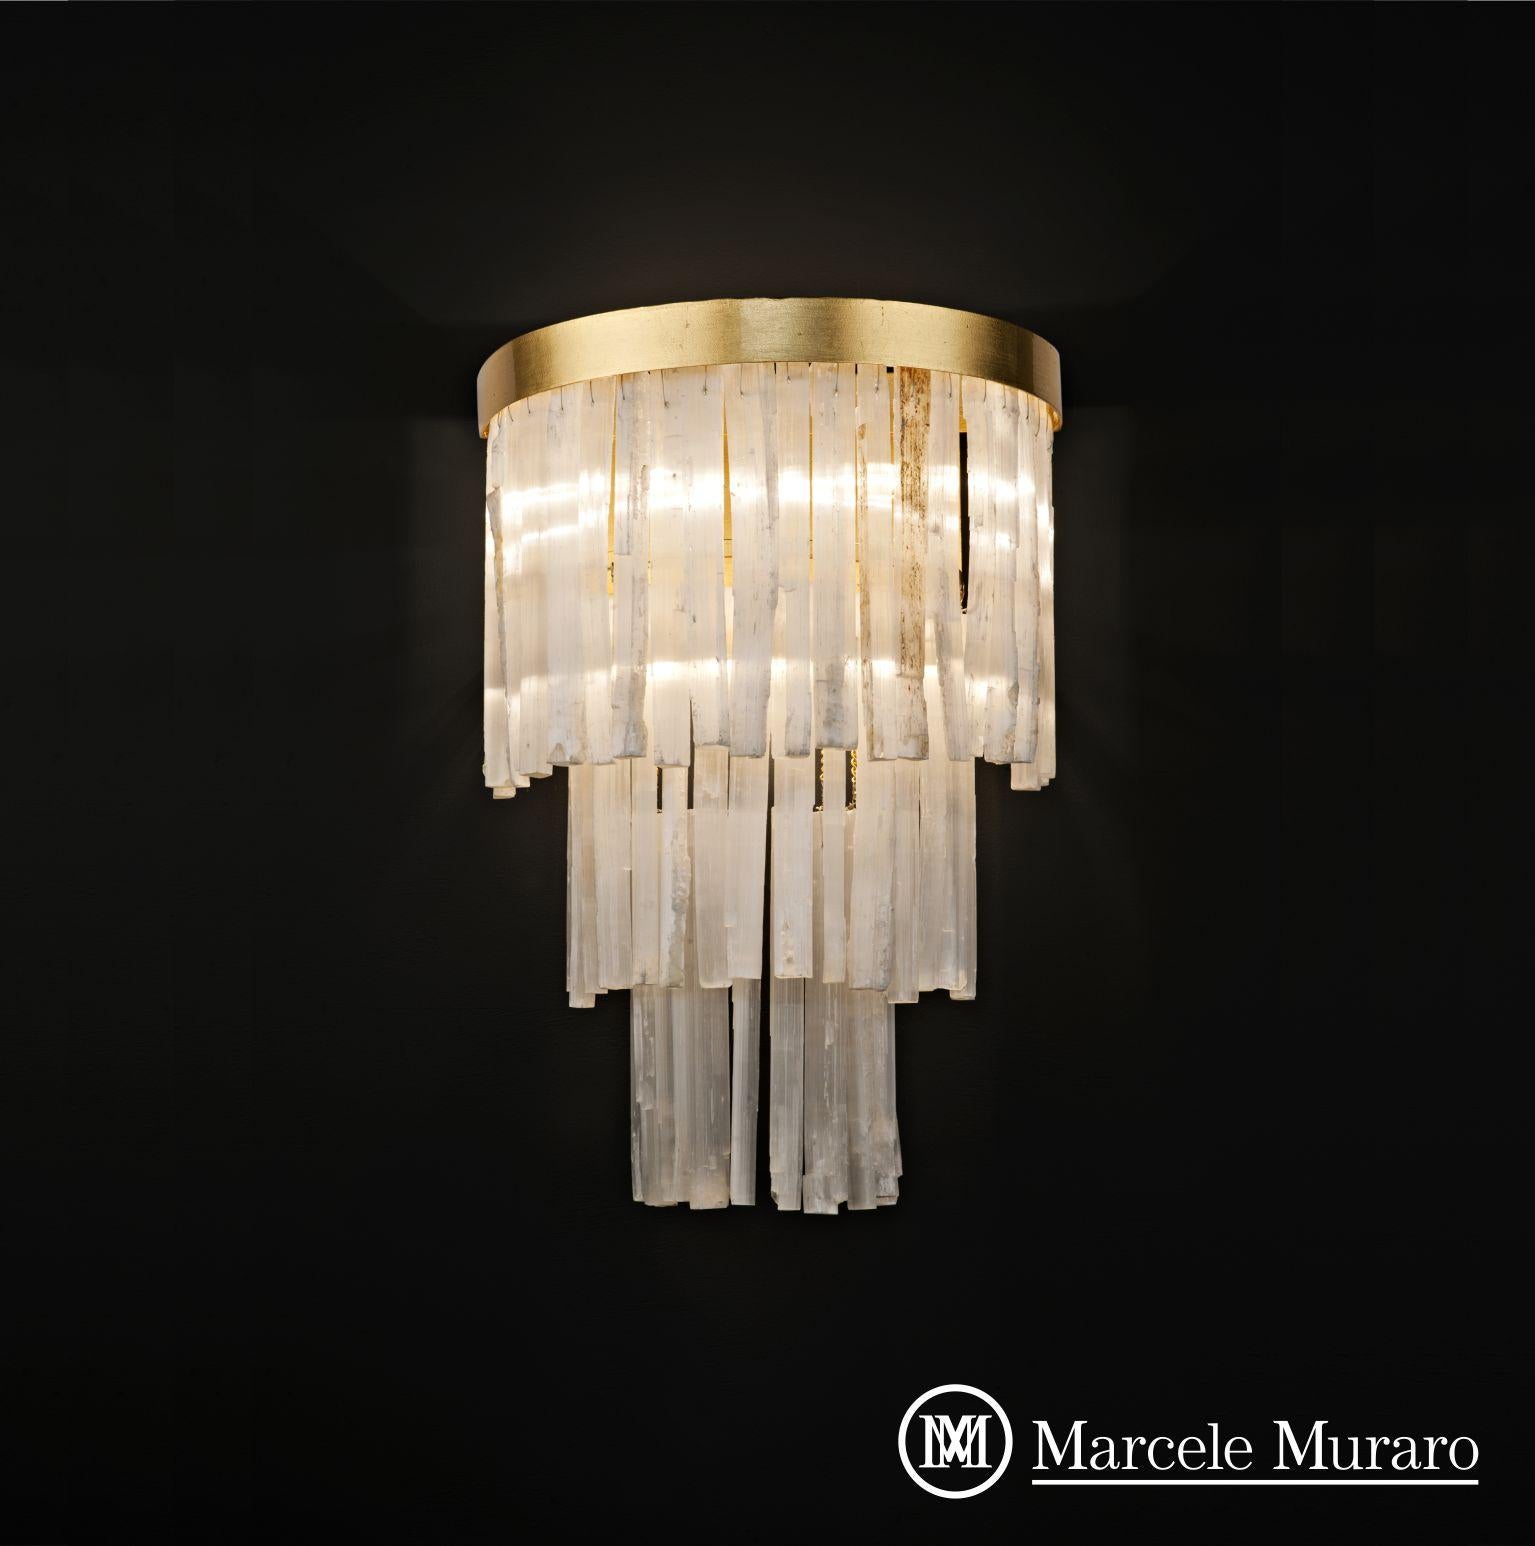 Casablanca wall sconce
Dimensions: D 20 x W 30 x H 55 cm 
Materials: Aluminum, plated. Natural Moroccan Stone. 
Lighting: 03 x G9
Finish: Silver Veneer, Aged Silver Veneer, Gold Veneer, Aged Gold Veneer, Copper Veneer, Aged Copper Veneer, Aged